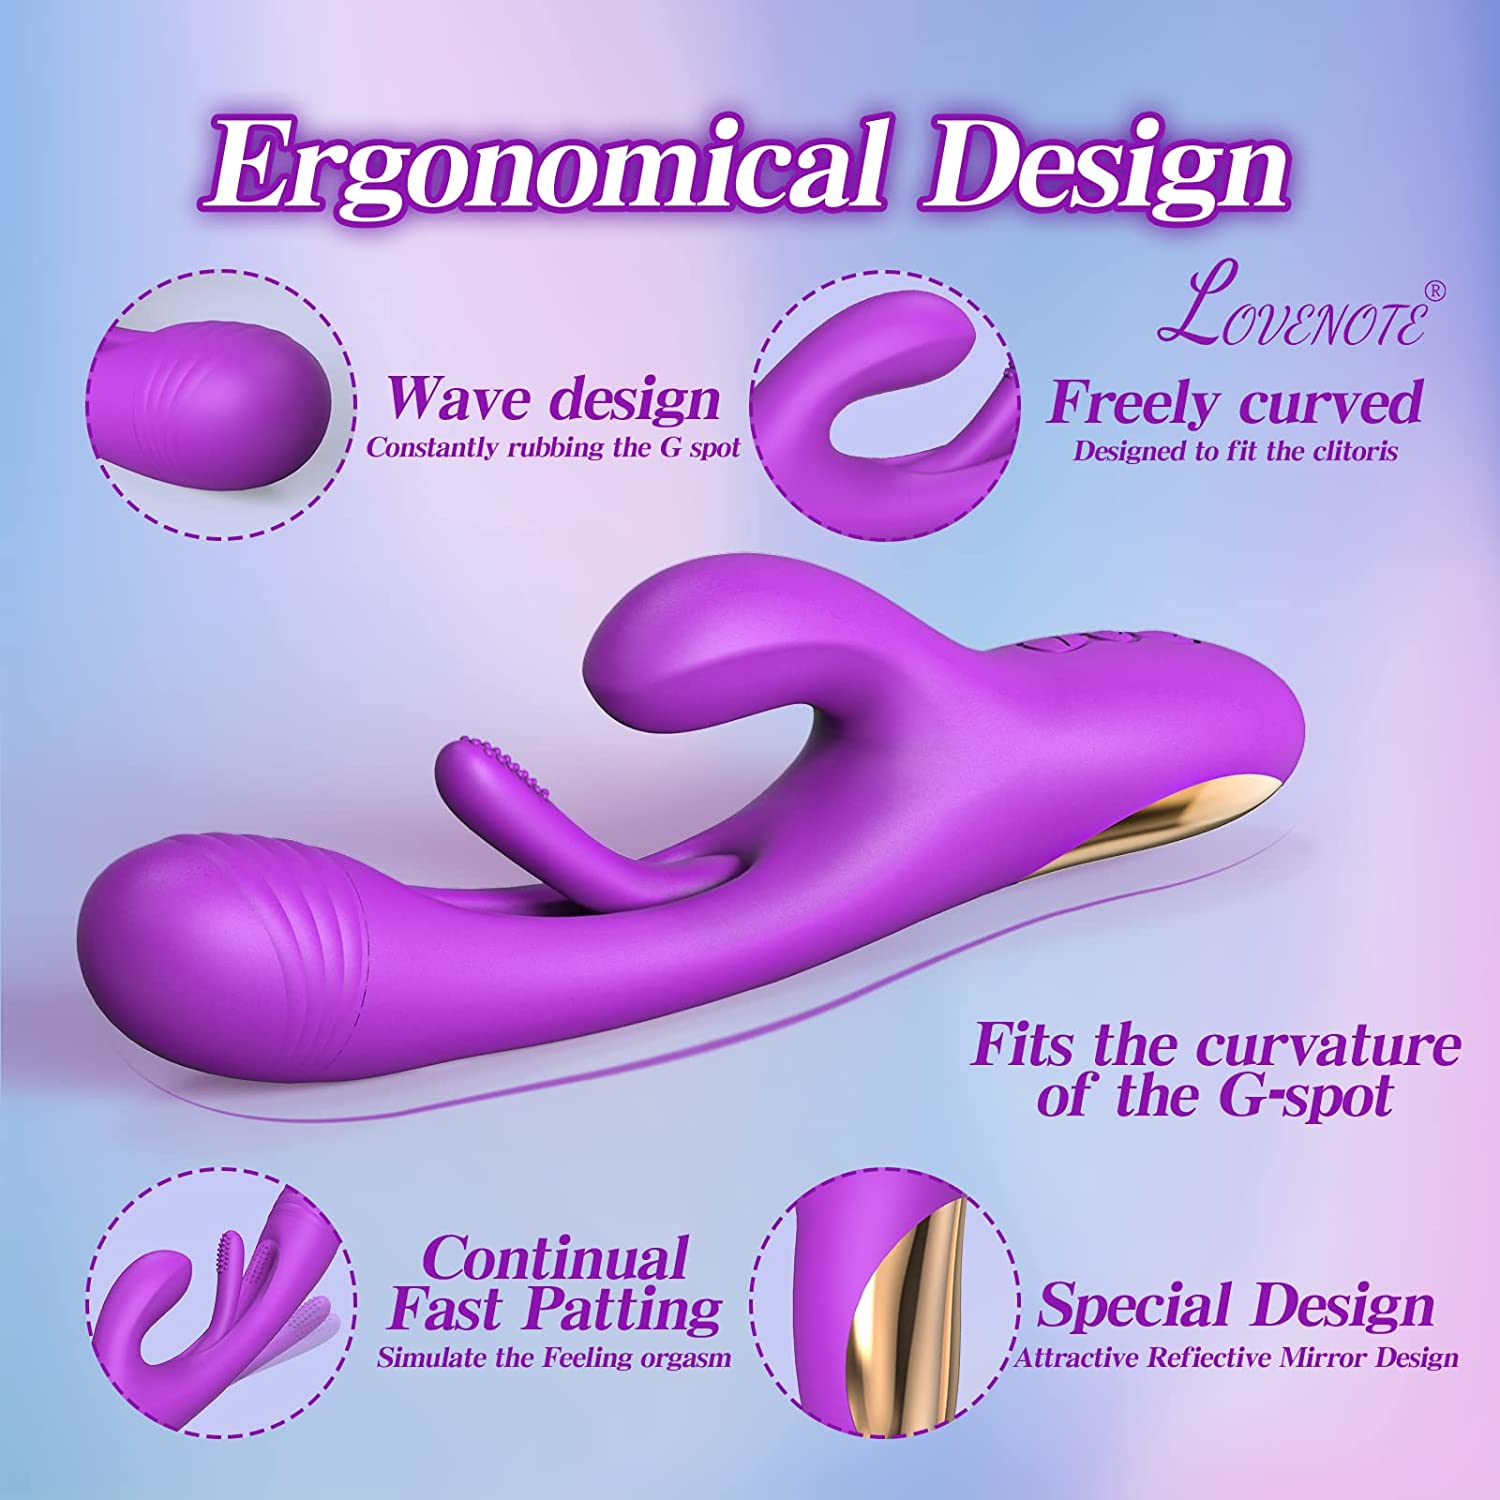 G Spot Vibrator with 7 Vibration 7 Flapping Modes